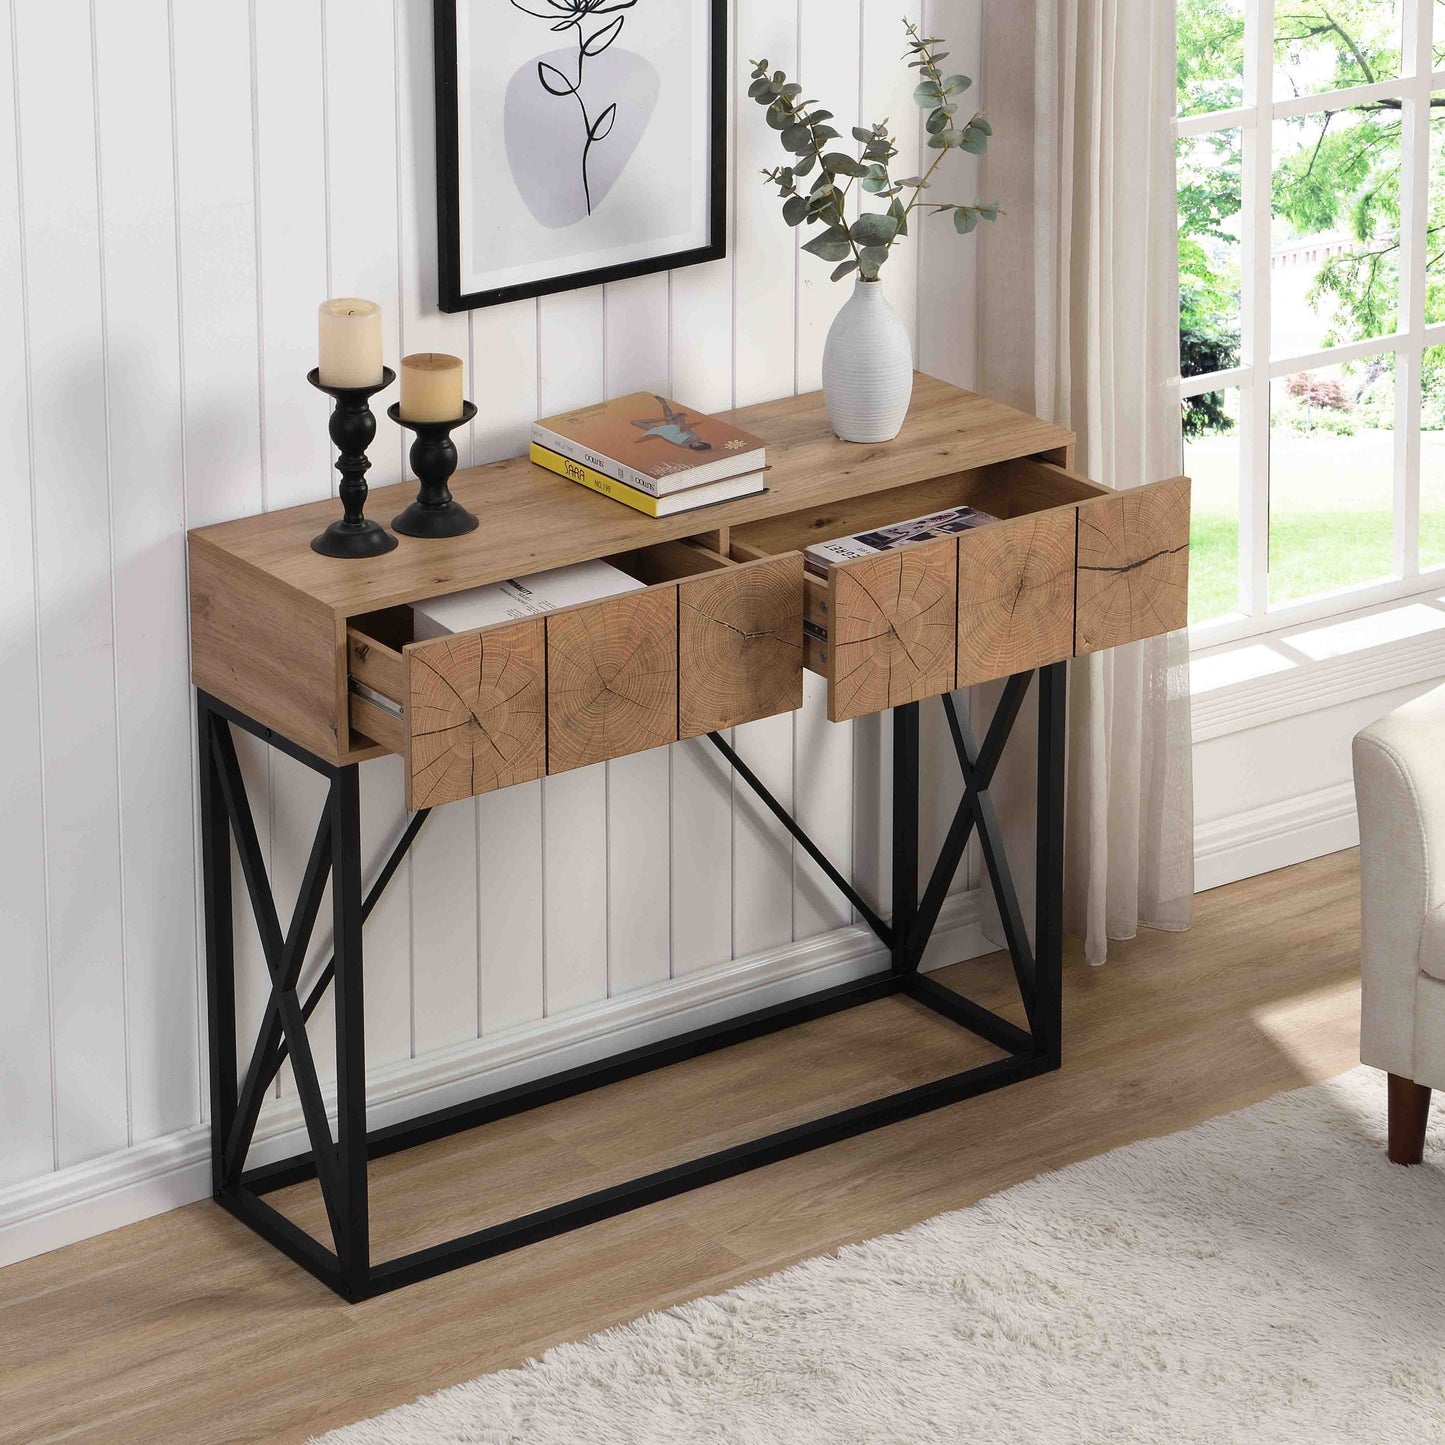 43" Natural Wood Console Table